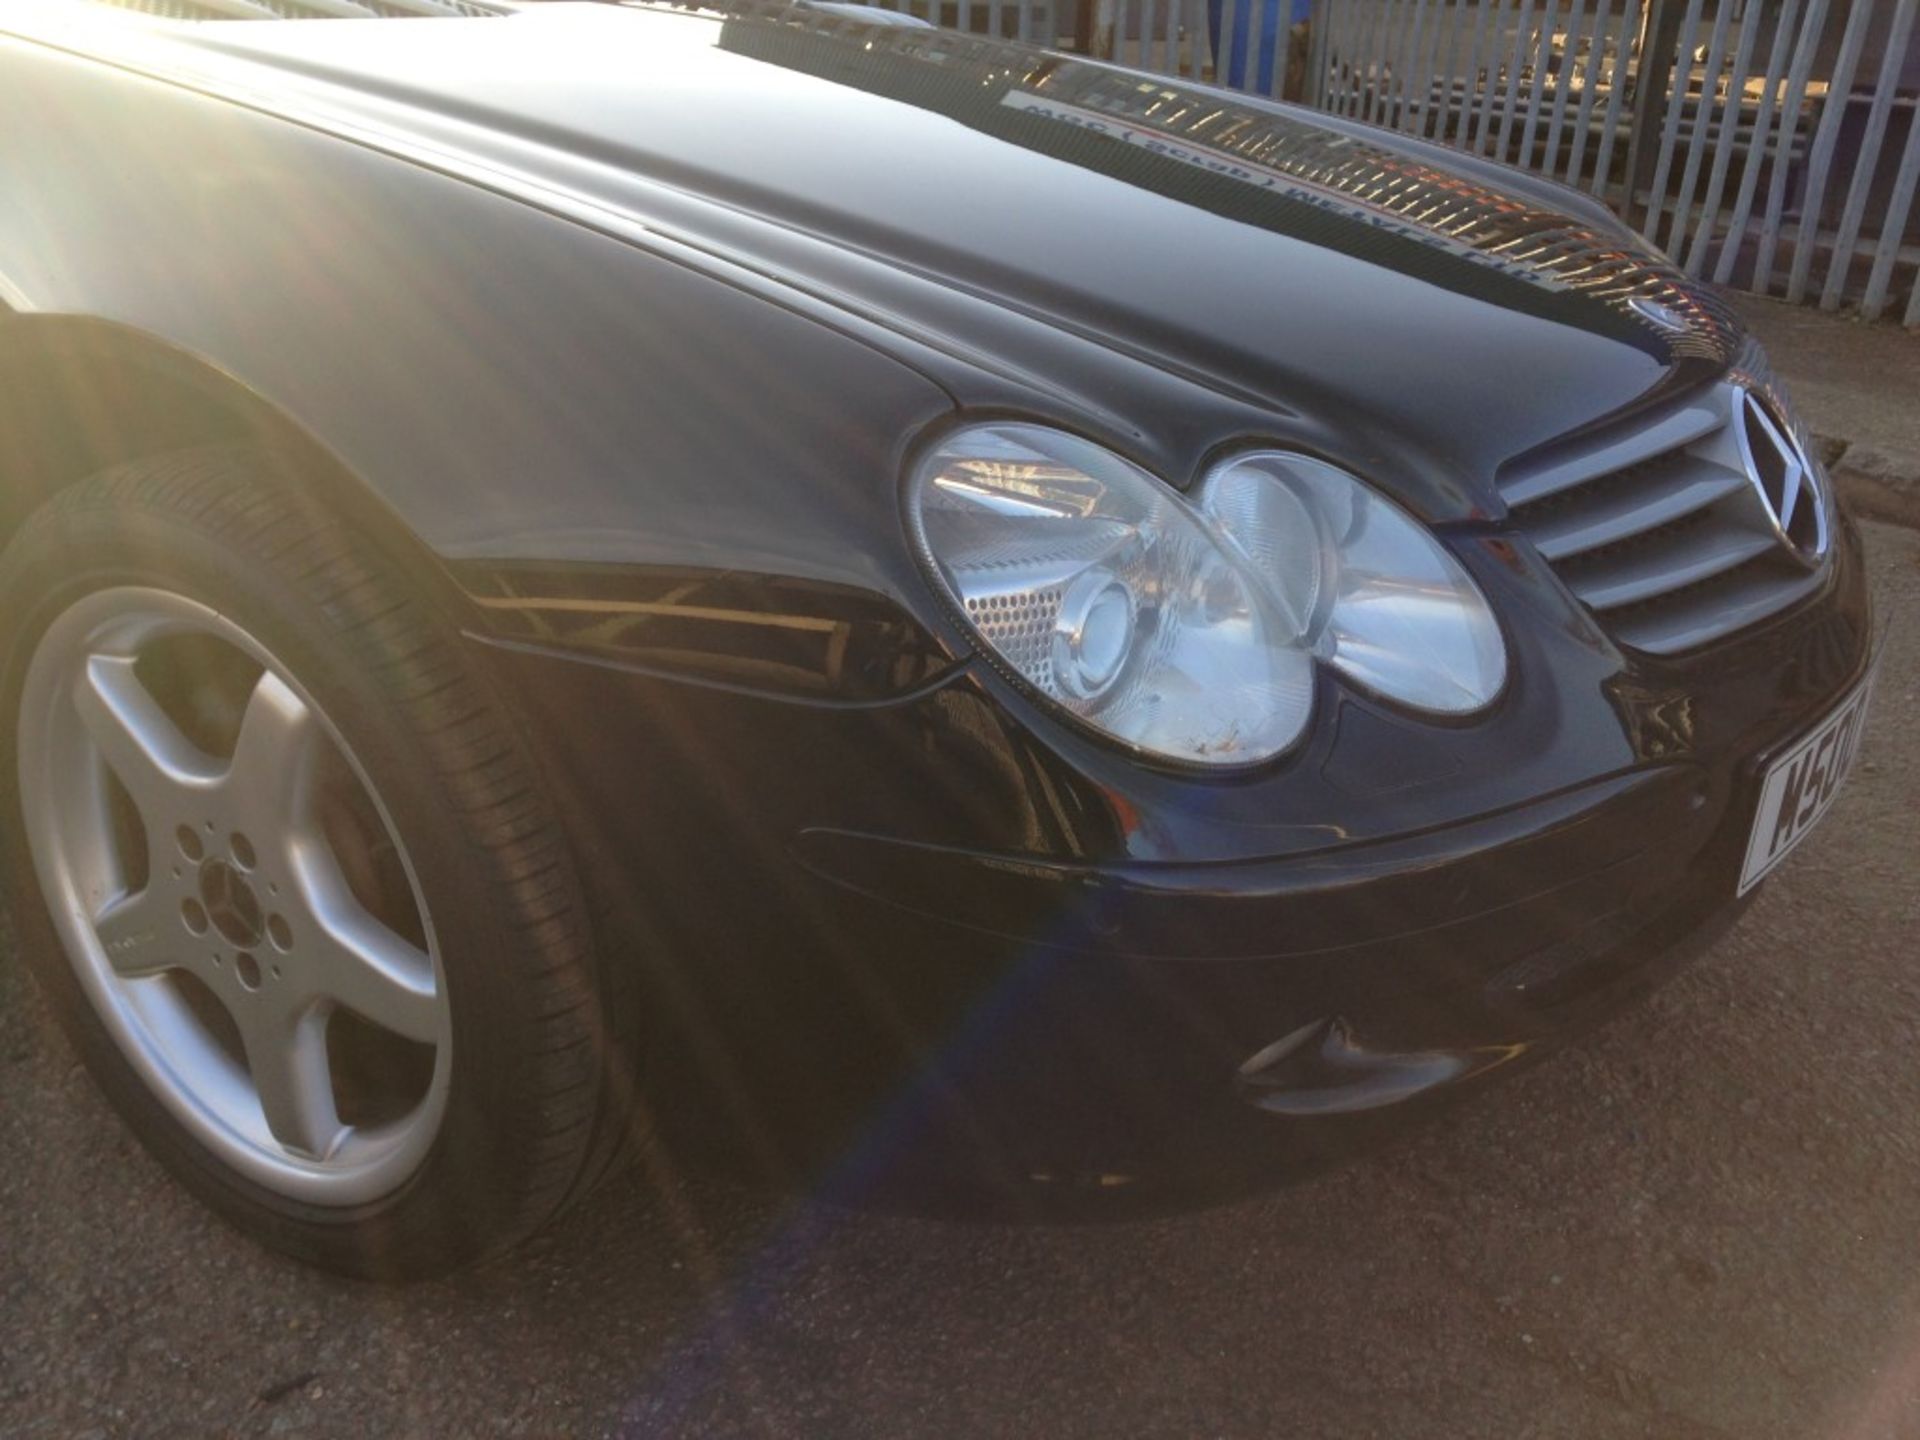 1 x Mercedes SL500 Automatic 5.0 Convertible - Petrol - Year 2002 - 94,500 Miles - Long MOT Expiry - Image 9 of 31